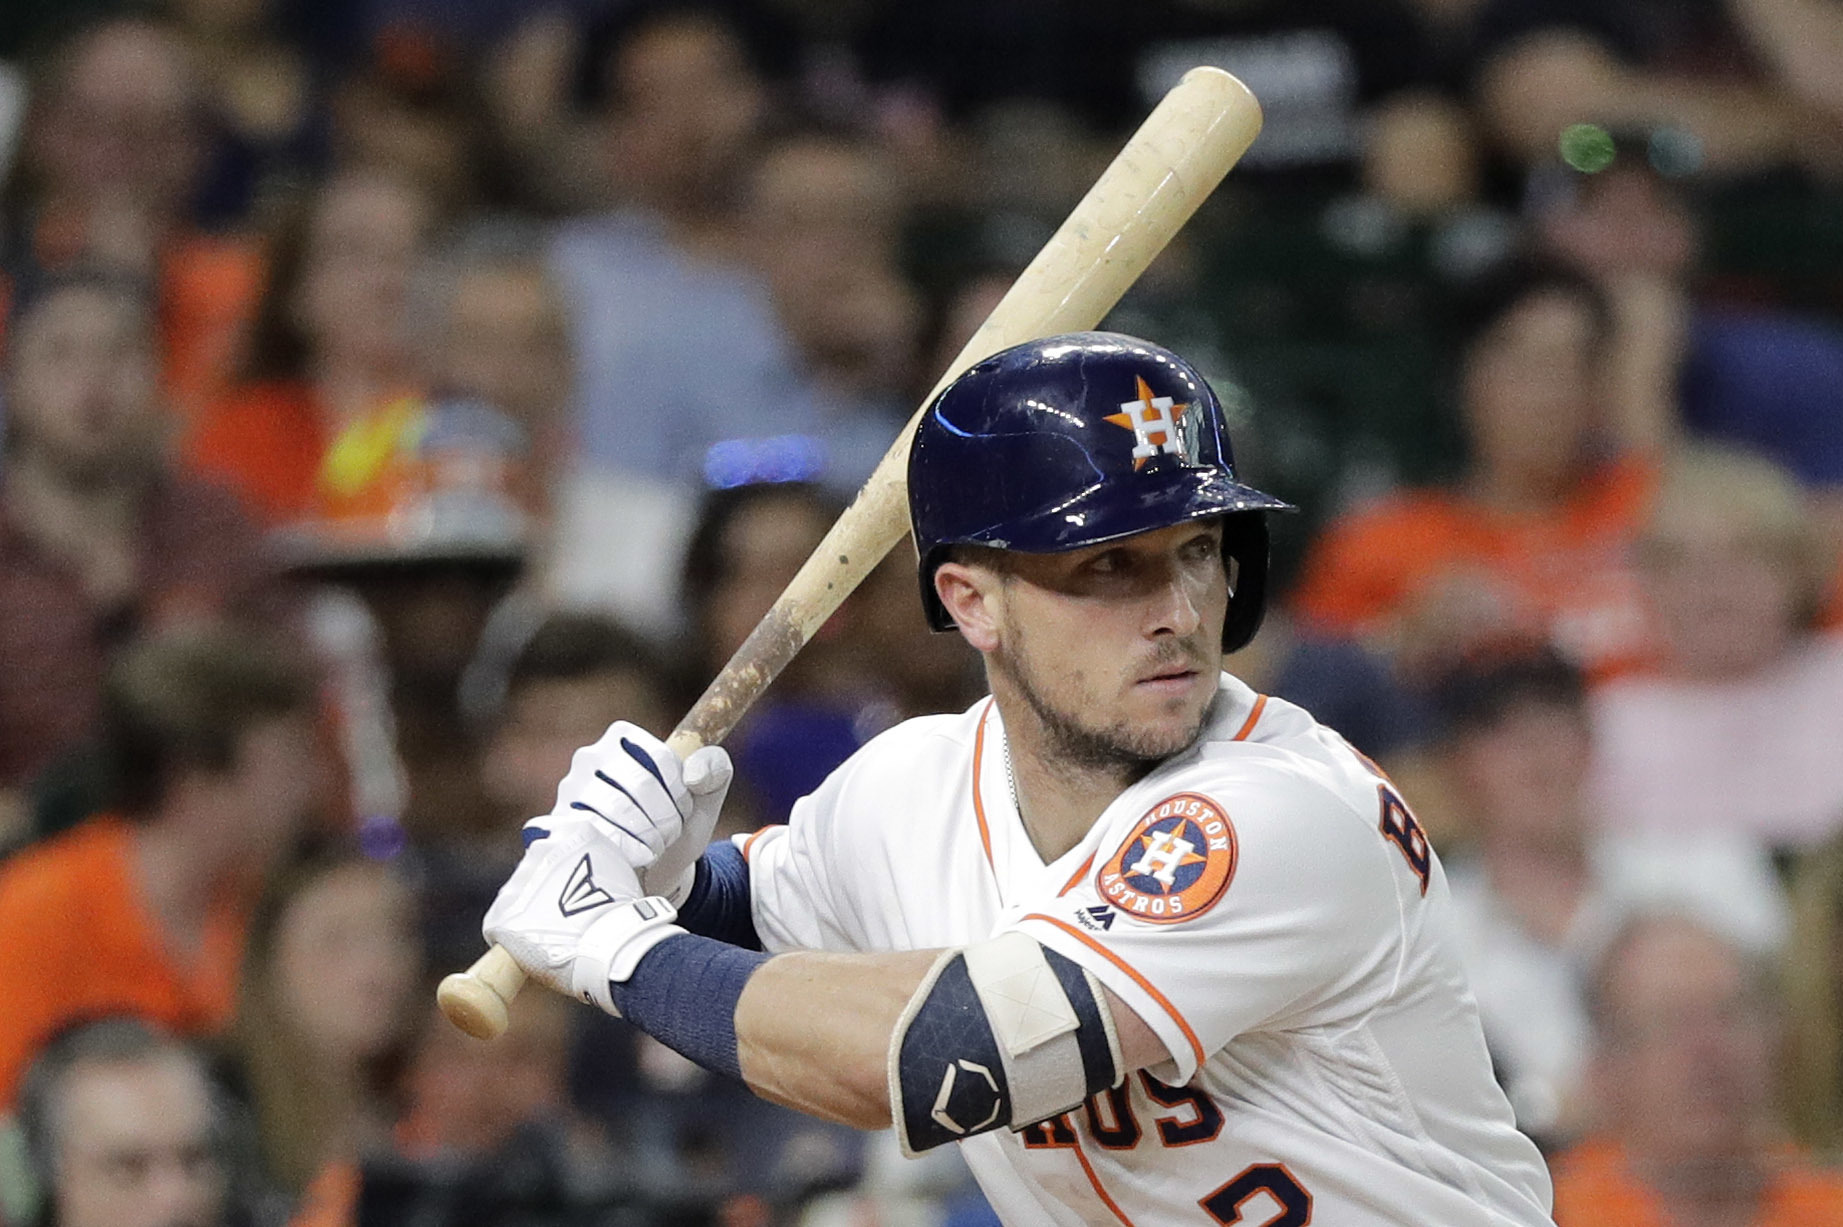 Astros select SS Bregman No. 2 overall in Draft